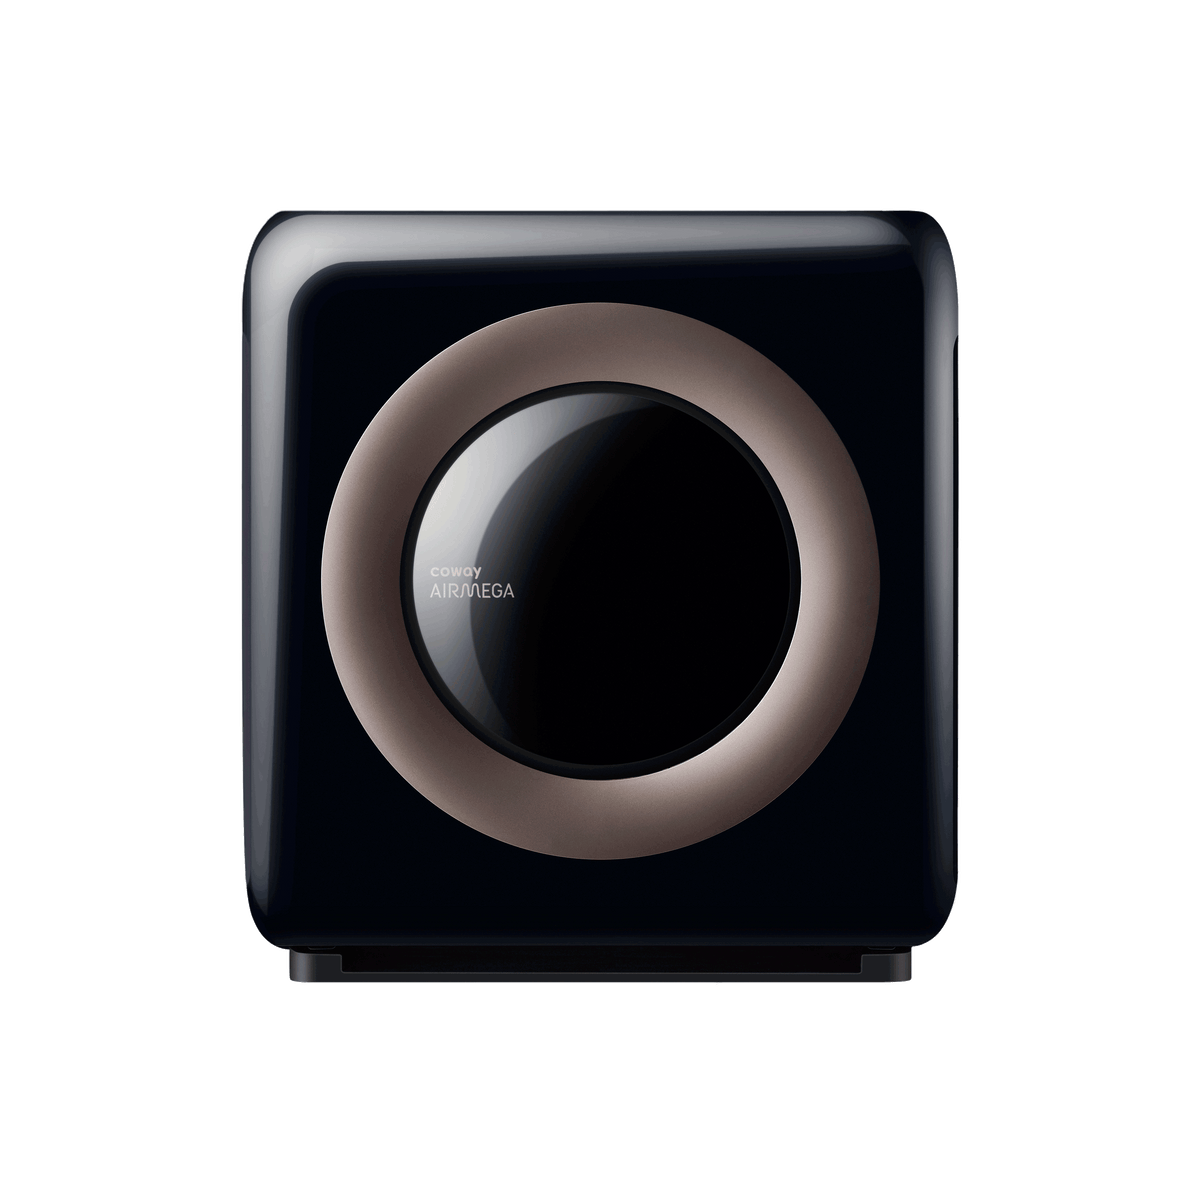 Coway AP-1512HHS - Smart & Mid Sized Air Purifier - Cowaymega